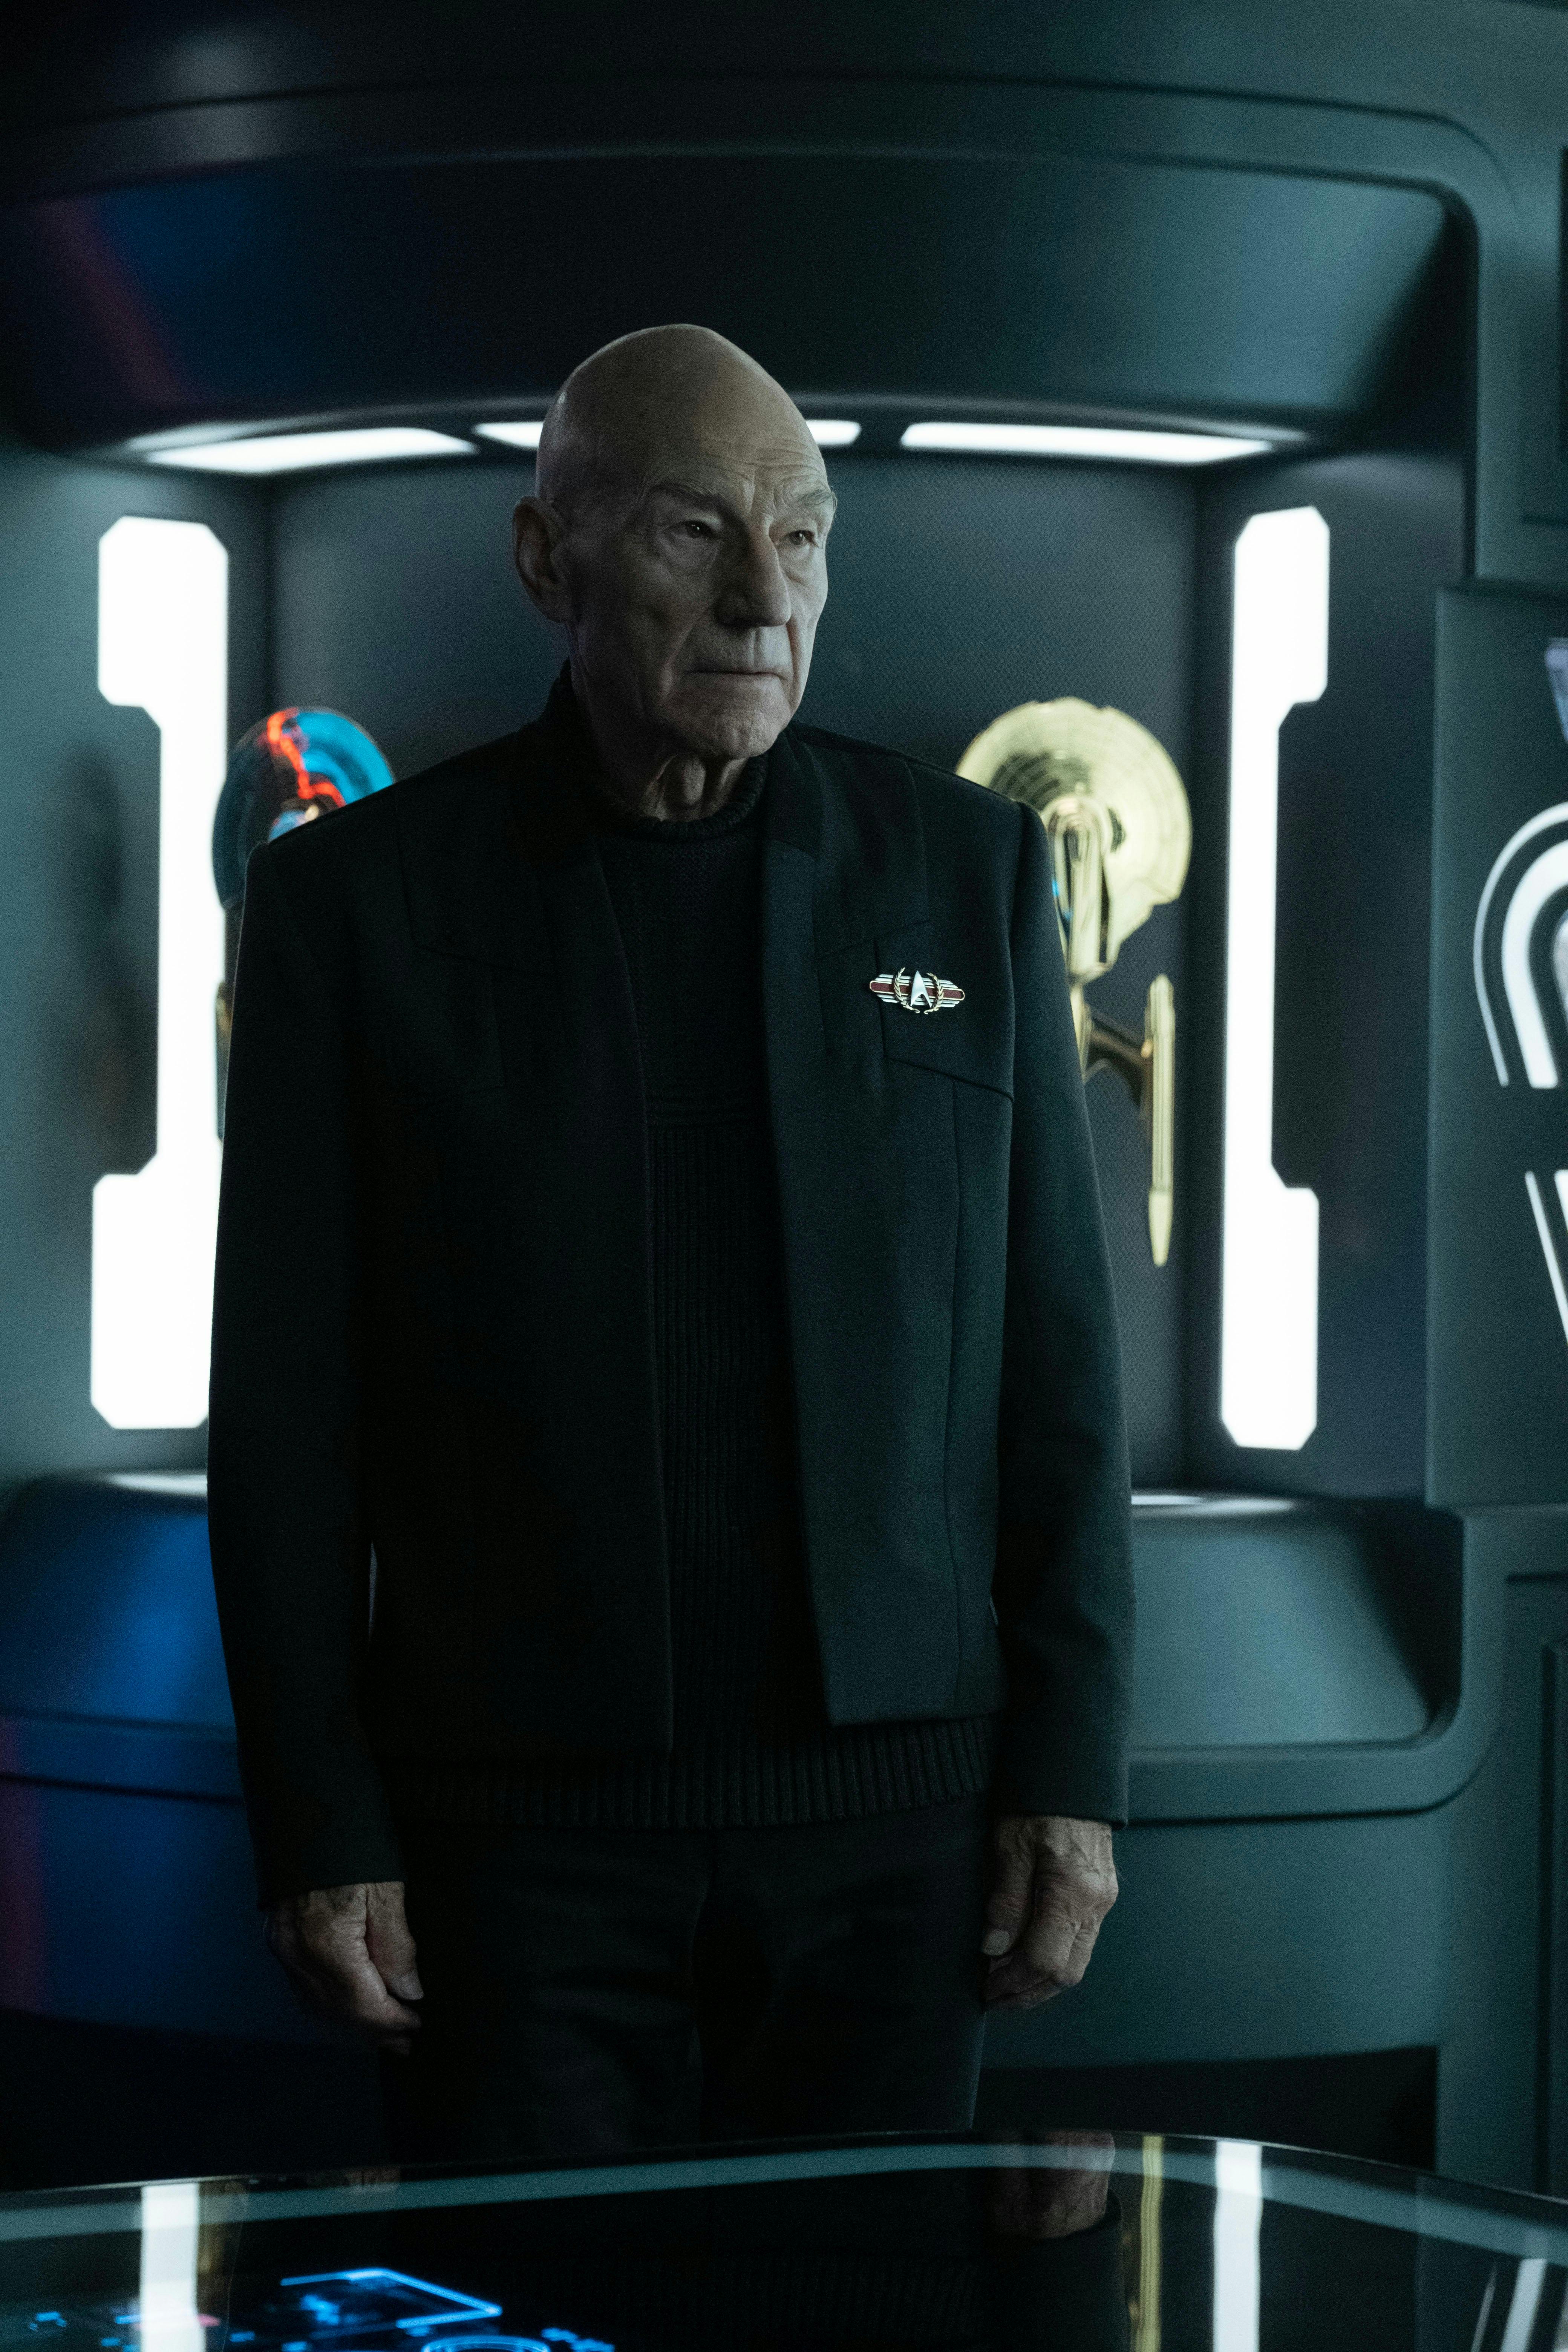 Admiral Jean-Luc Picard stands in front of a display of artifacts on Star Trek: Picard